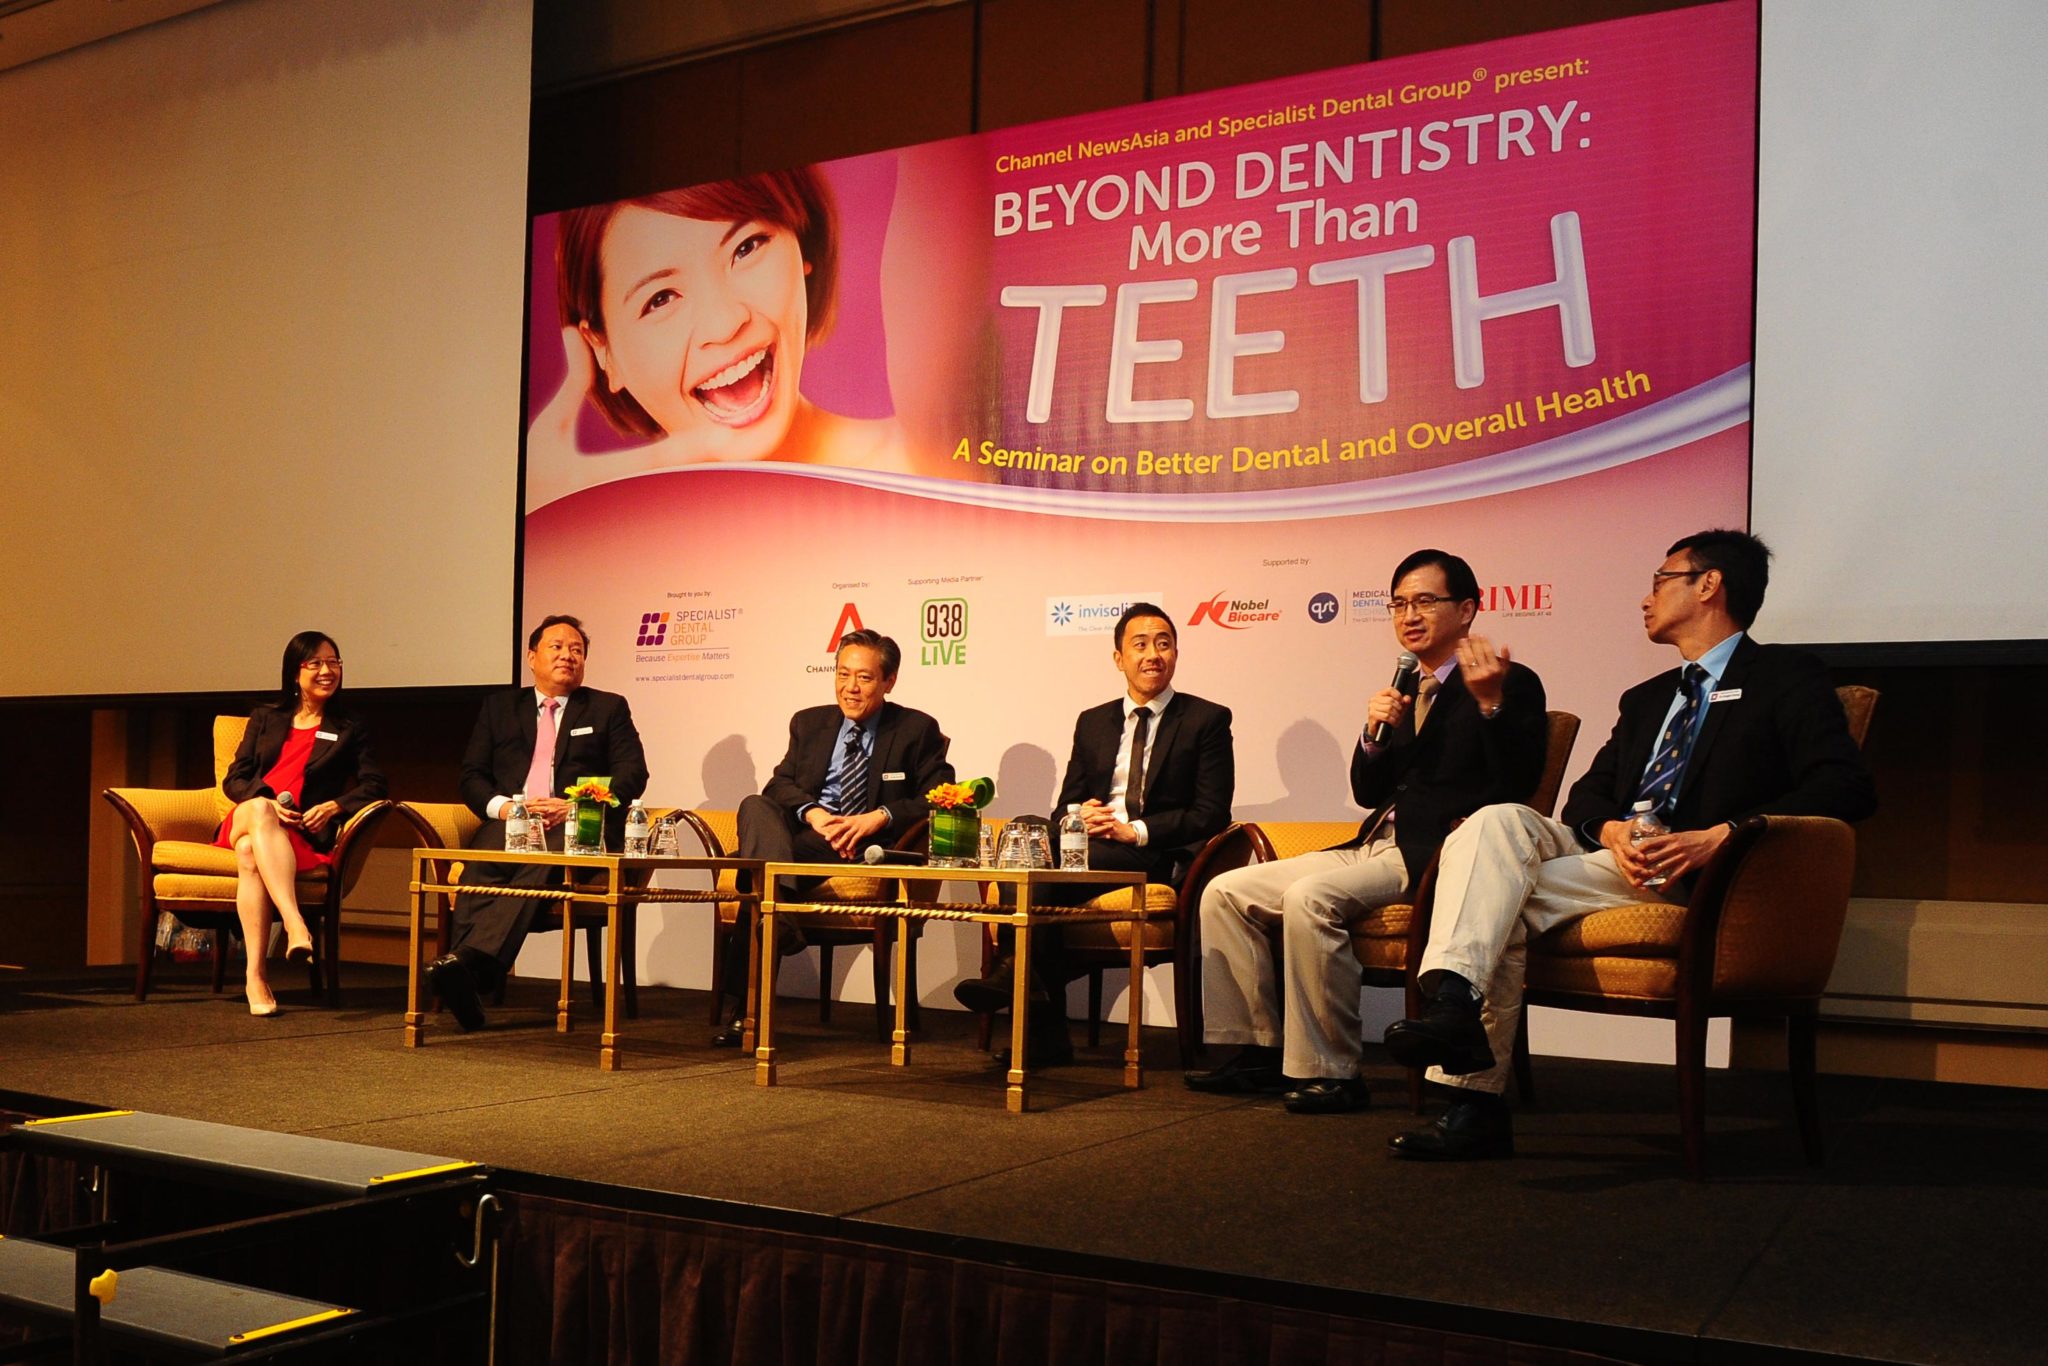 Thank You for Attending “Beyond Dentistry: More Than Teeth”!